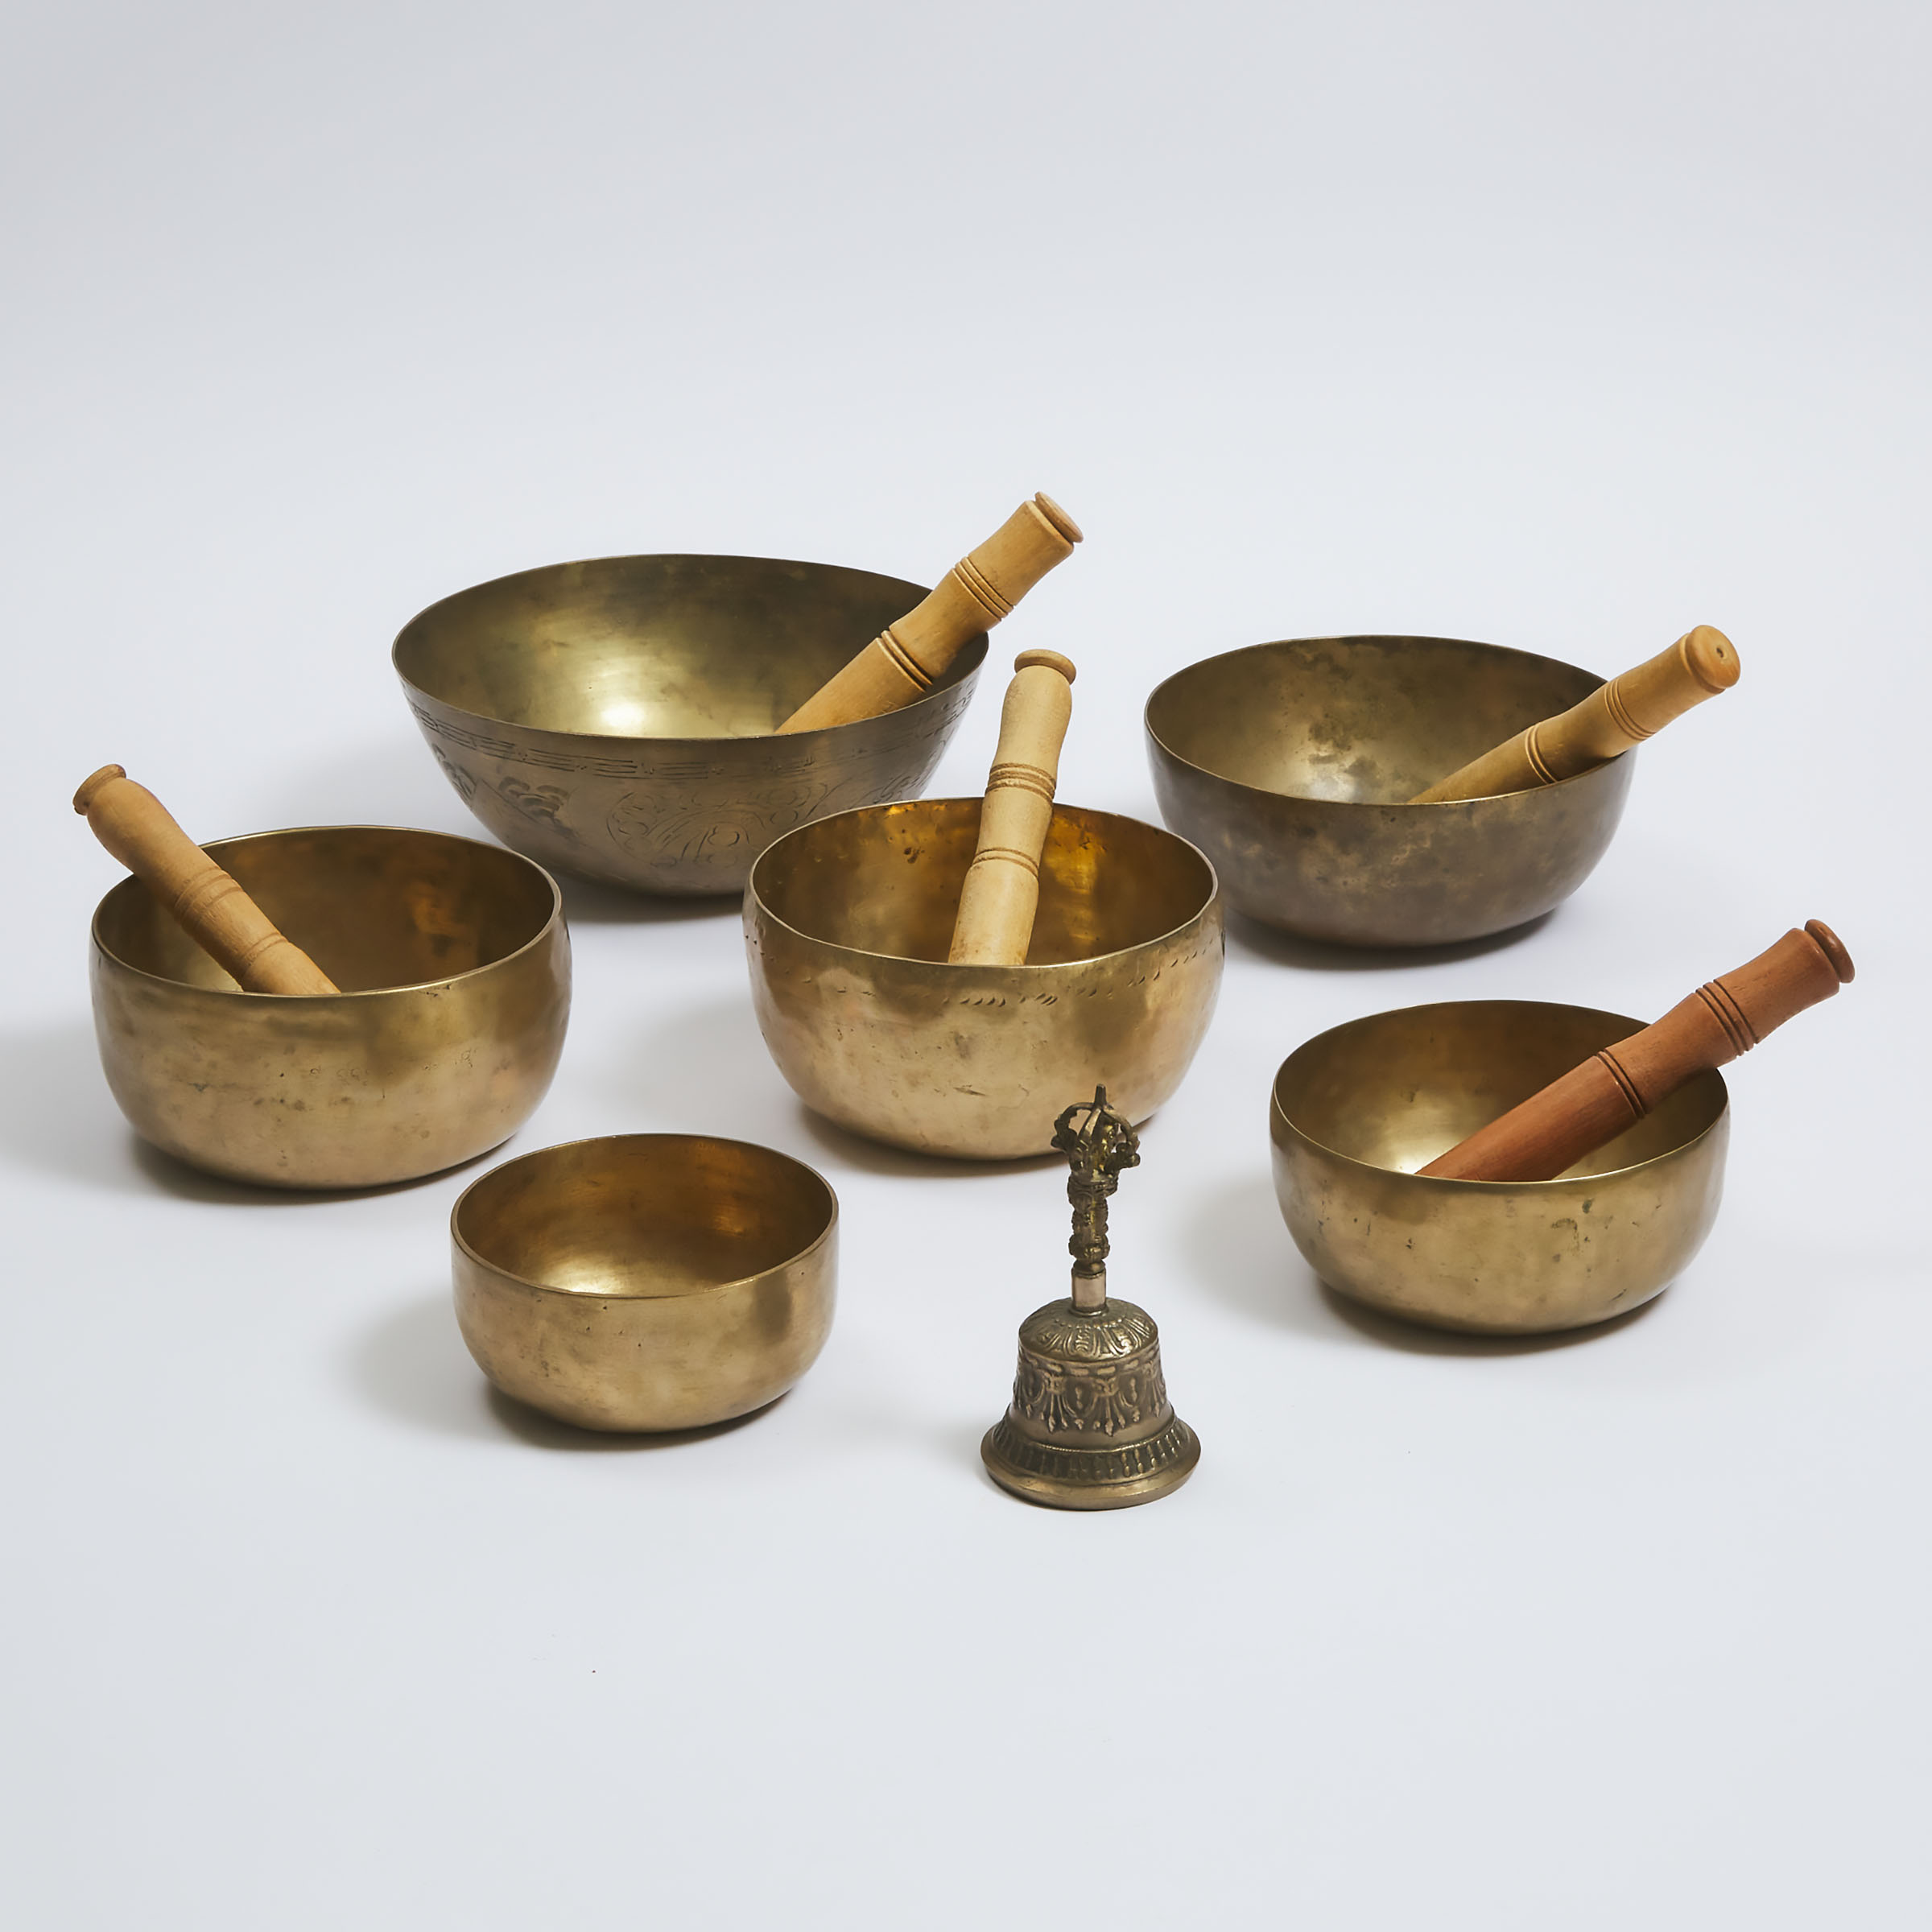 A Group of Six Tibetan Singing Bowls, Together With a Bell